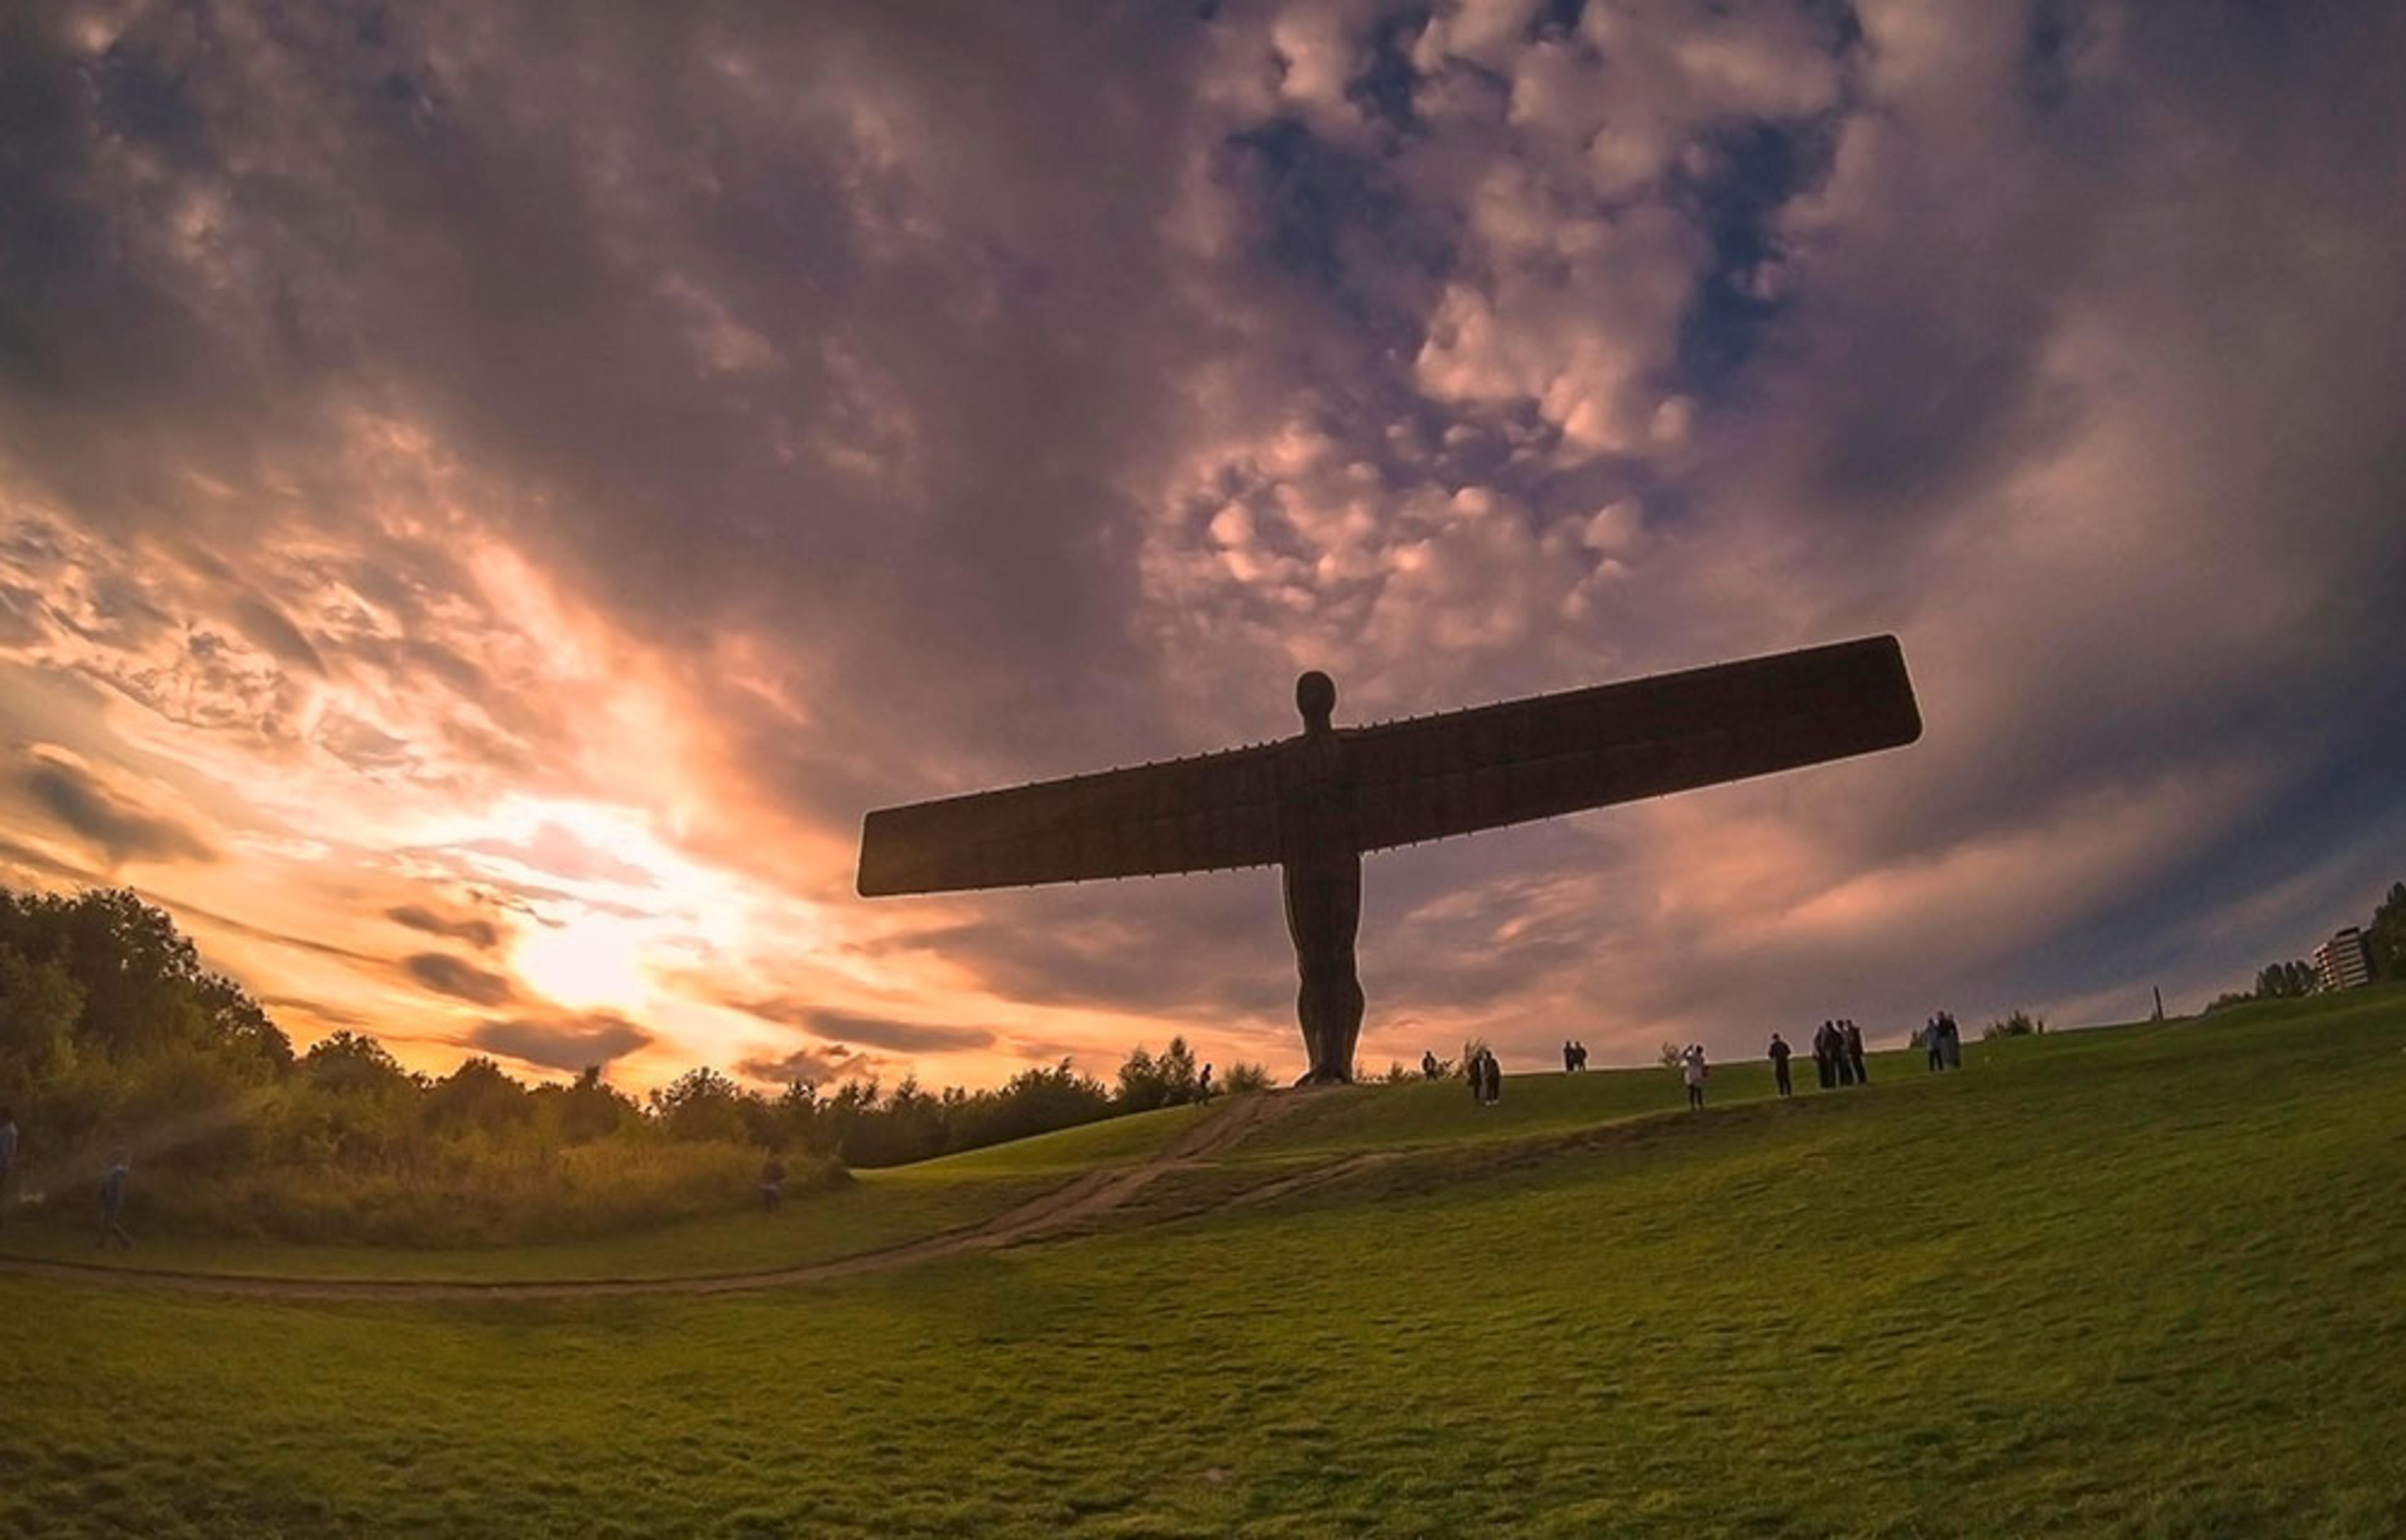 Dusk image of the Angel of the North